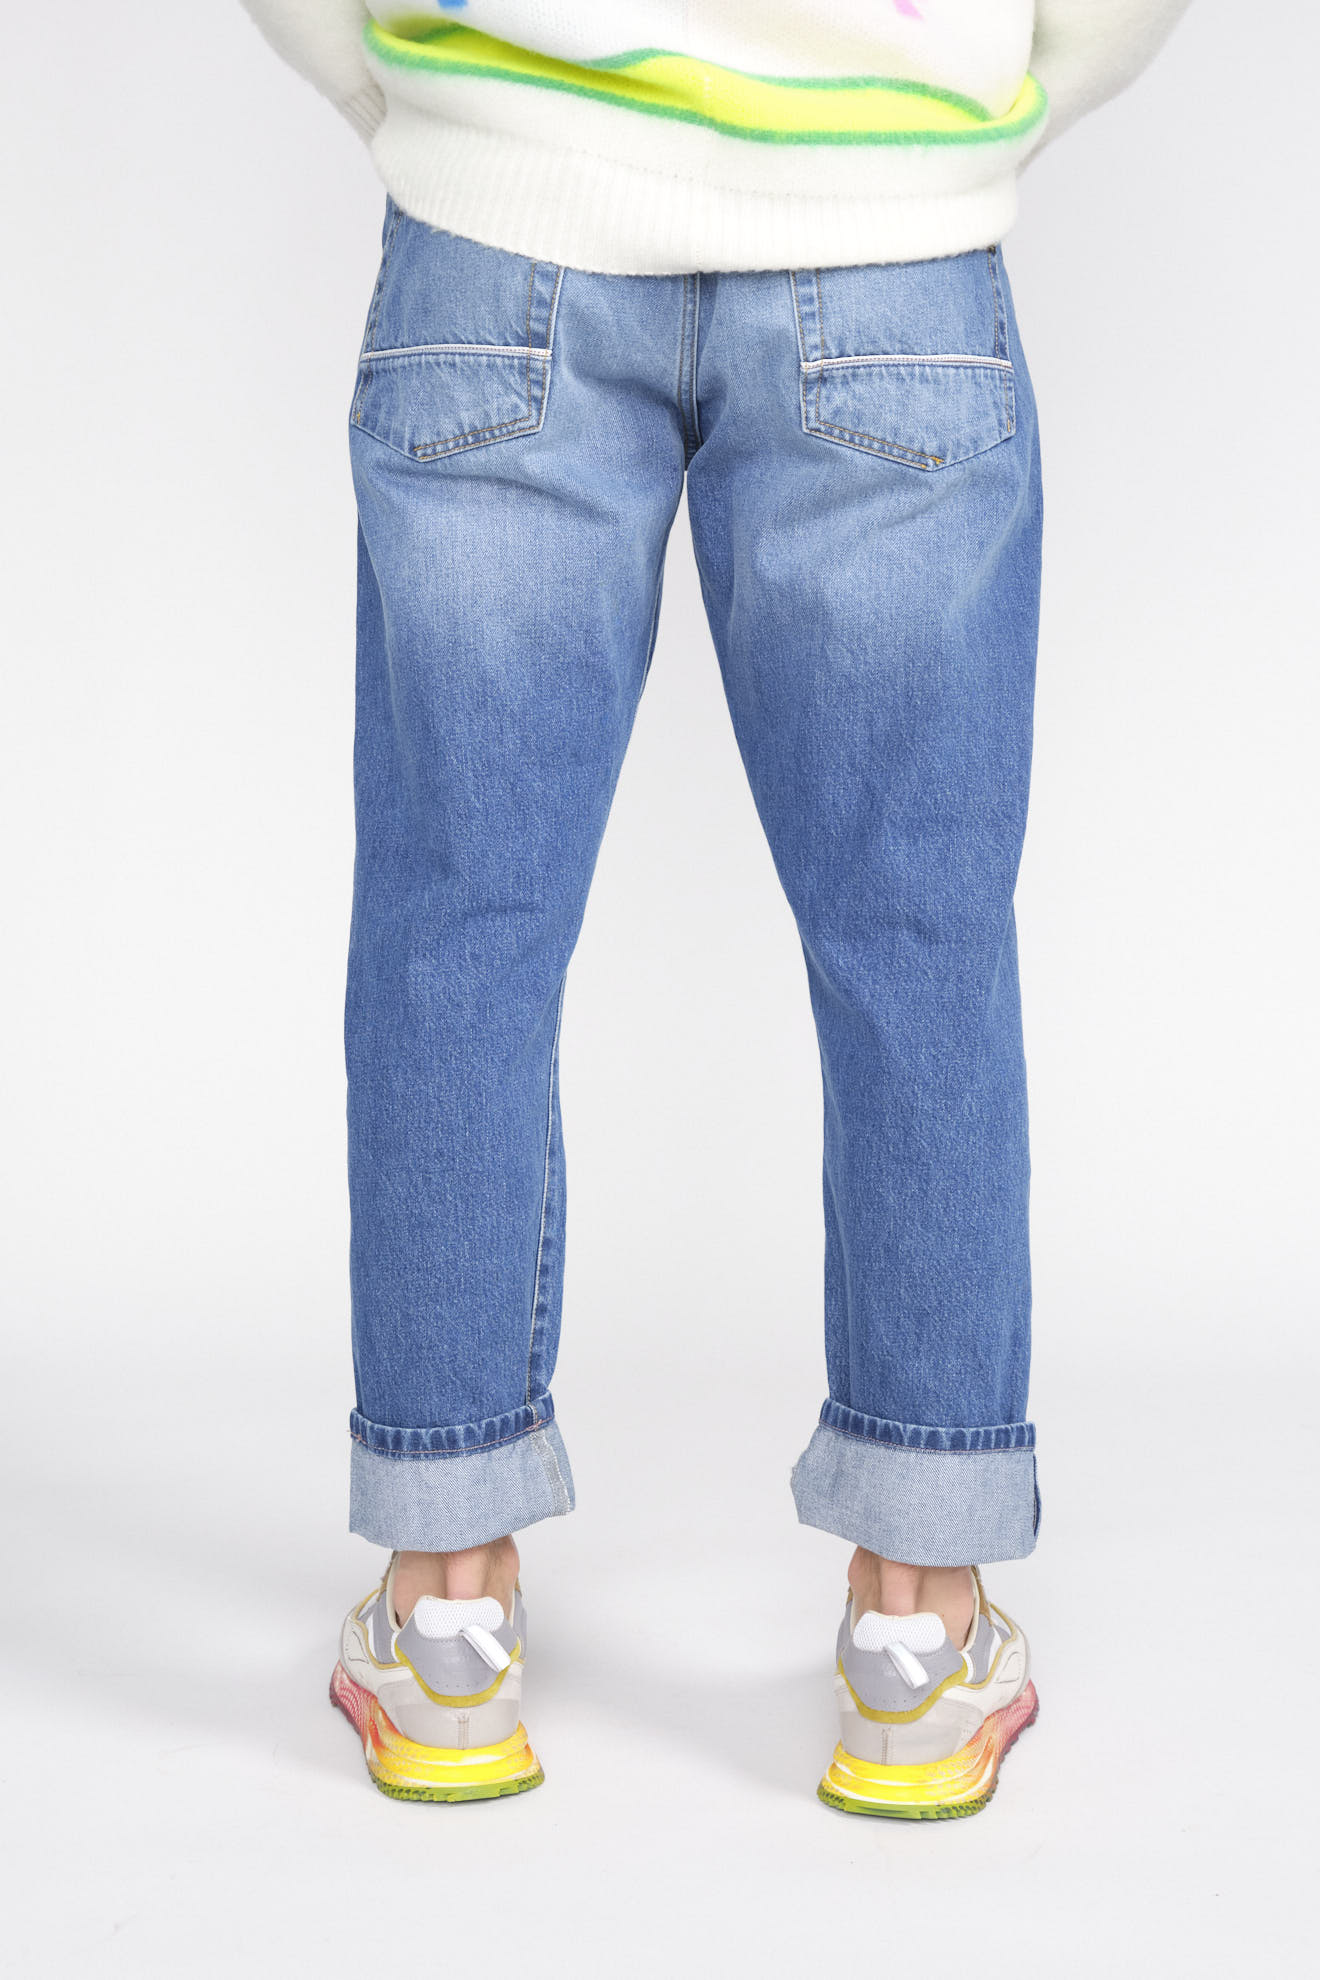 maurizio massimino Jose - denim jeans with patch patches blue 48